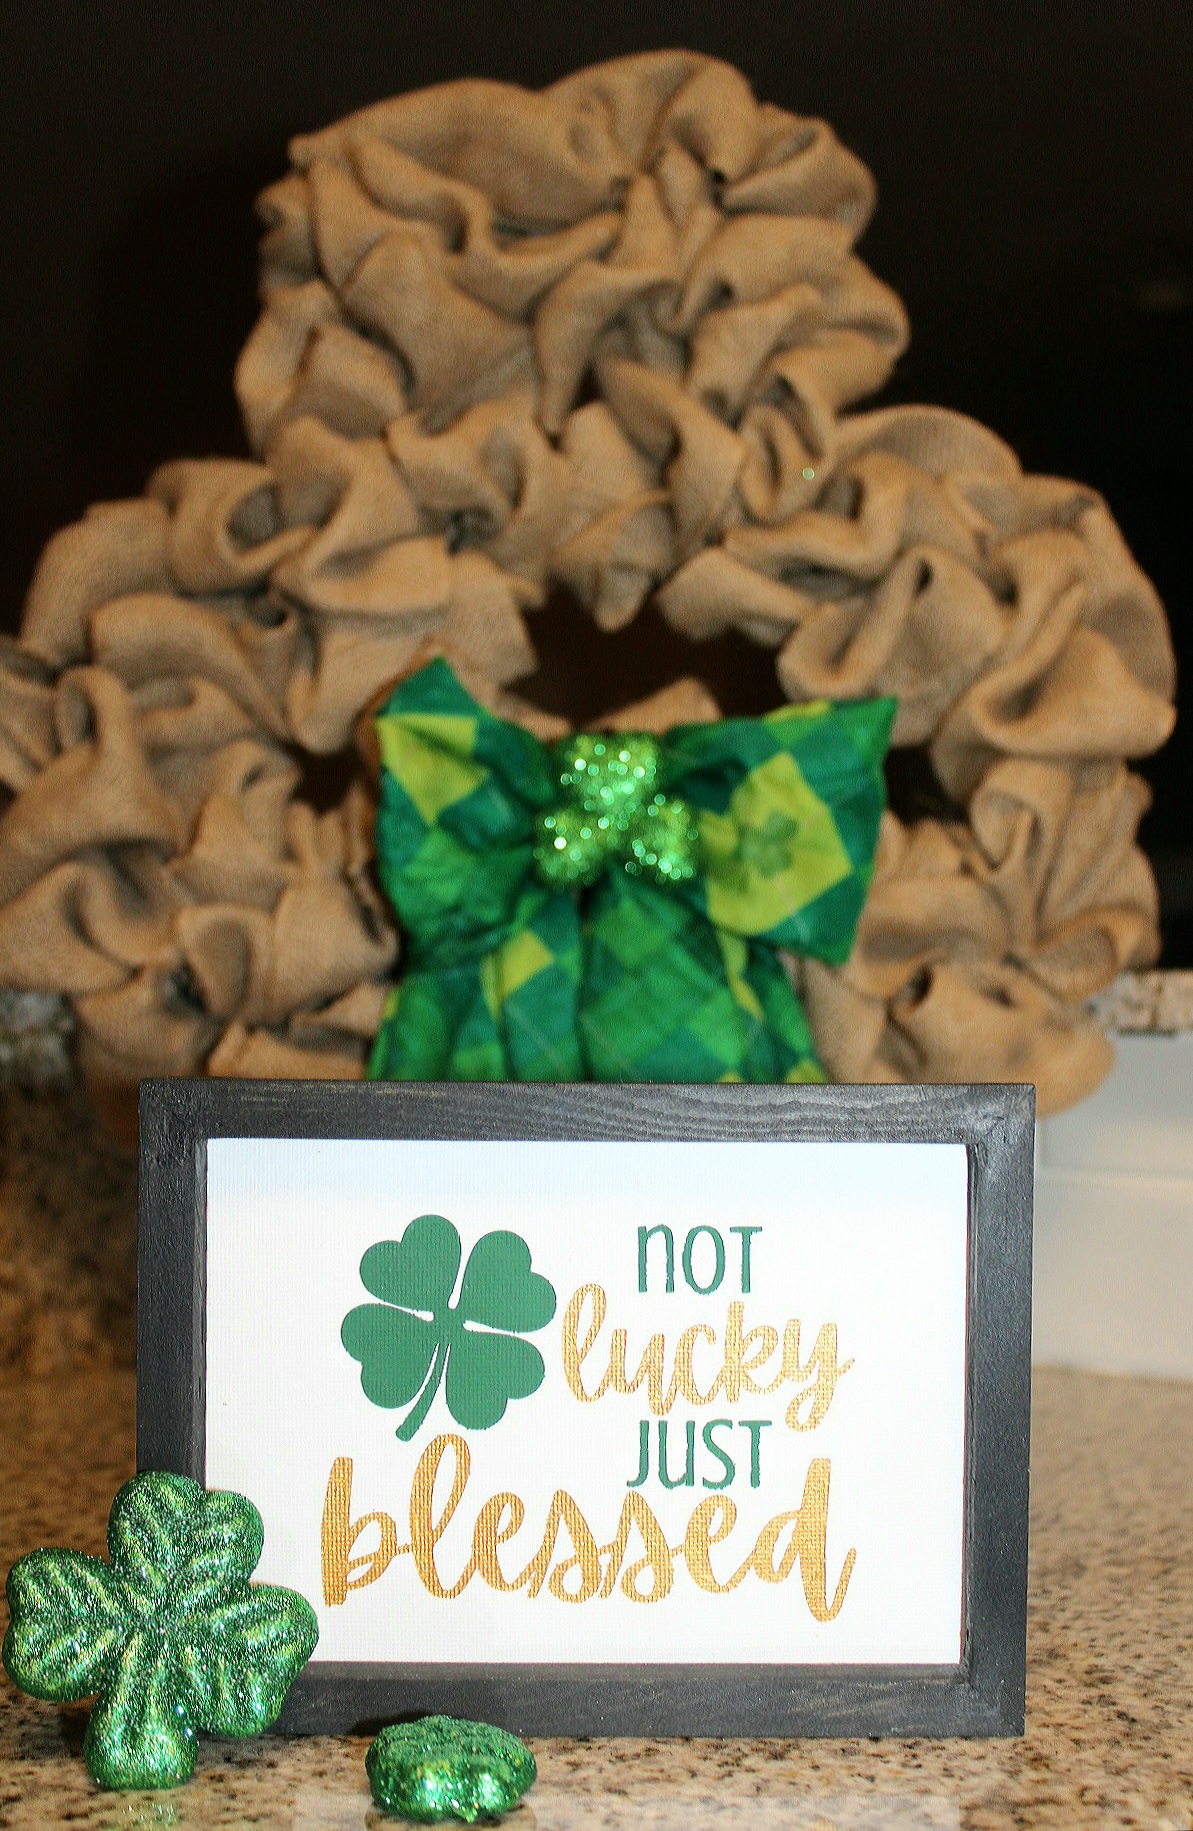 "Not lucky just blessed" Cricut stencil sign in front of a burlap shamrock wreath.